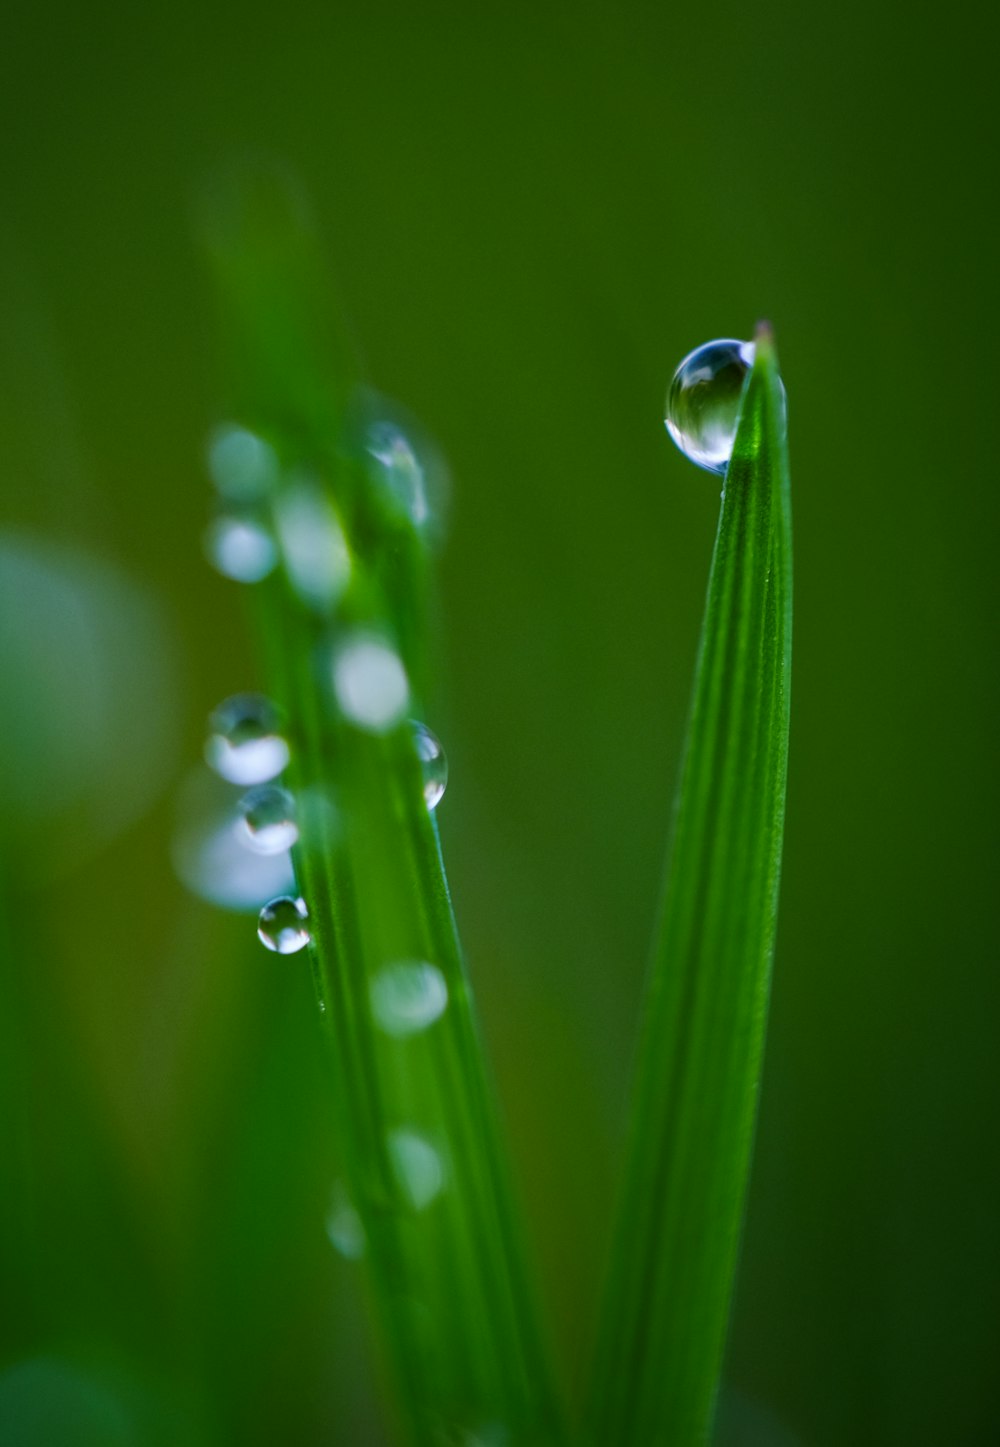 dew drops on green leaves